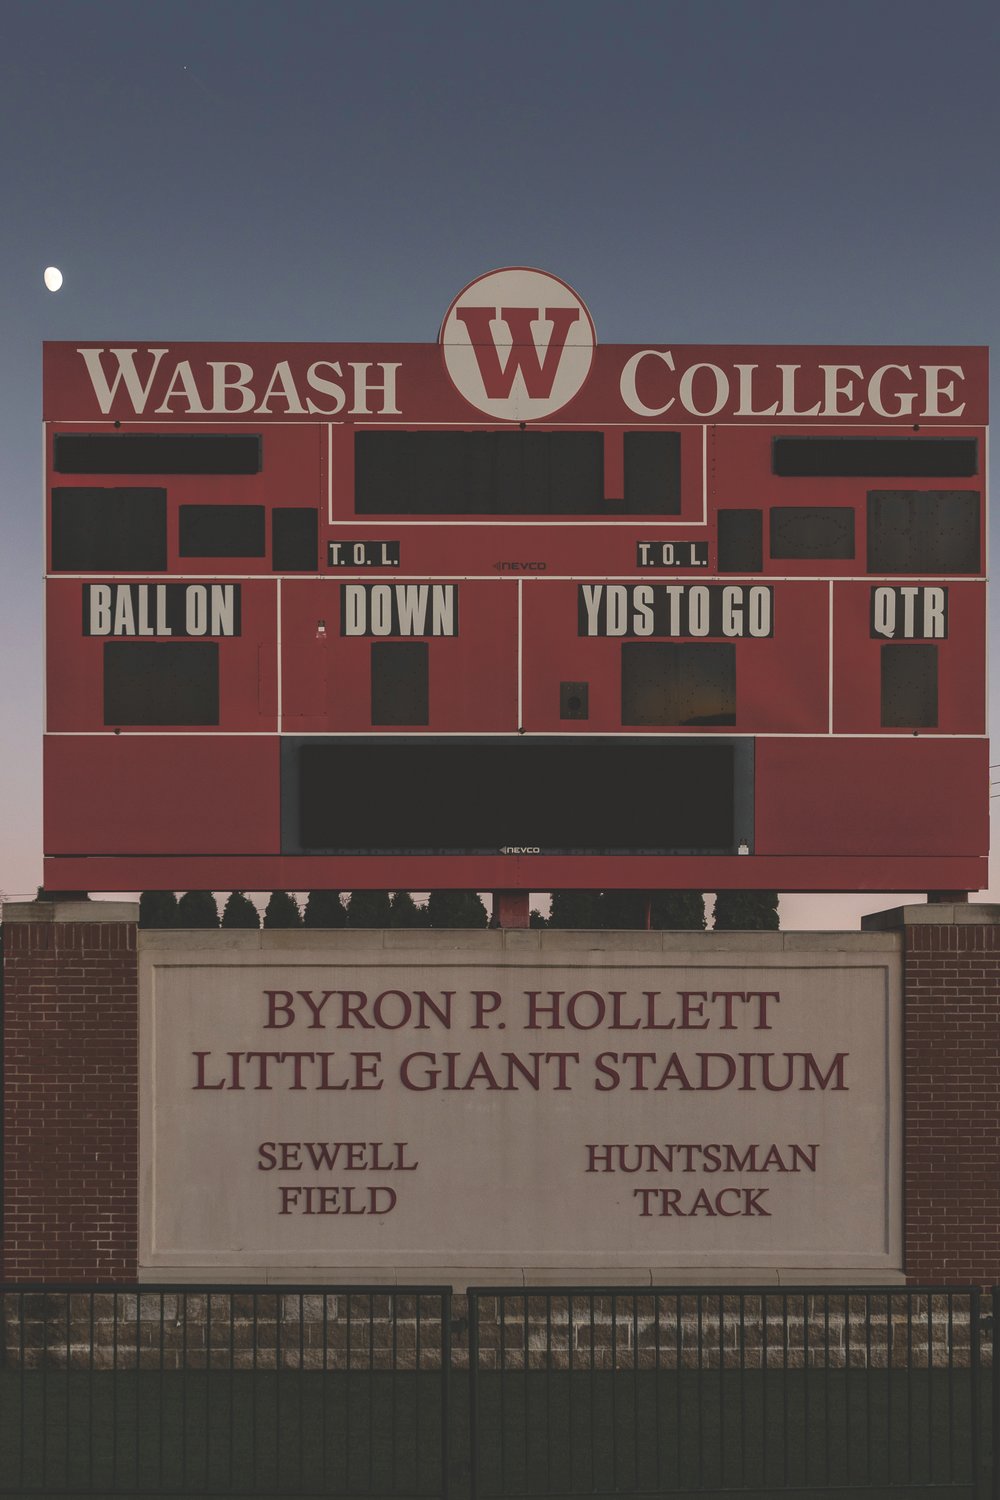 Wabash College/Tom Runge
The iconic scoreboard at Wabash along with the rest of the stadium will come down to make room for a new football stadium set to open next fall.